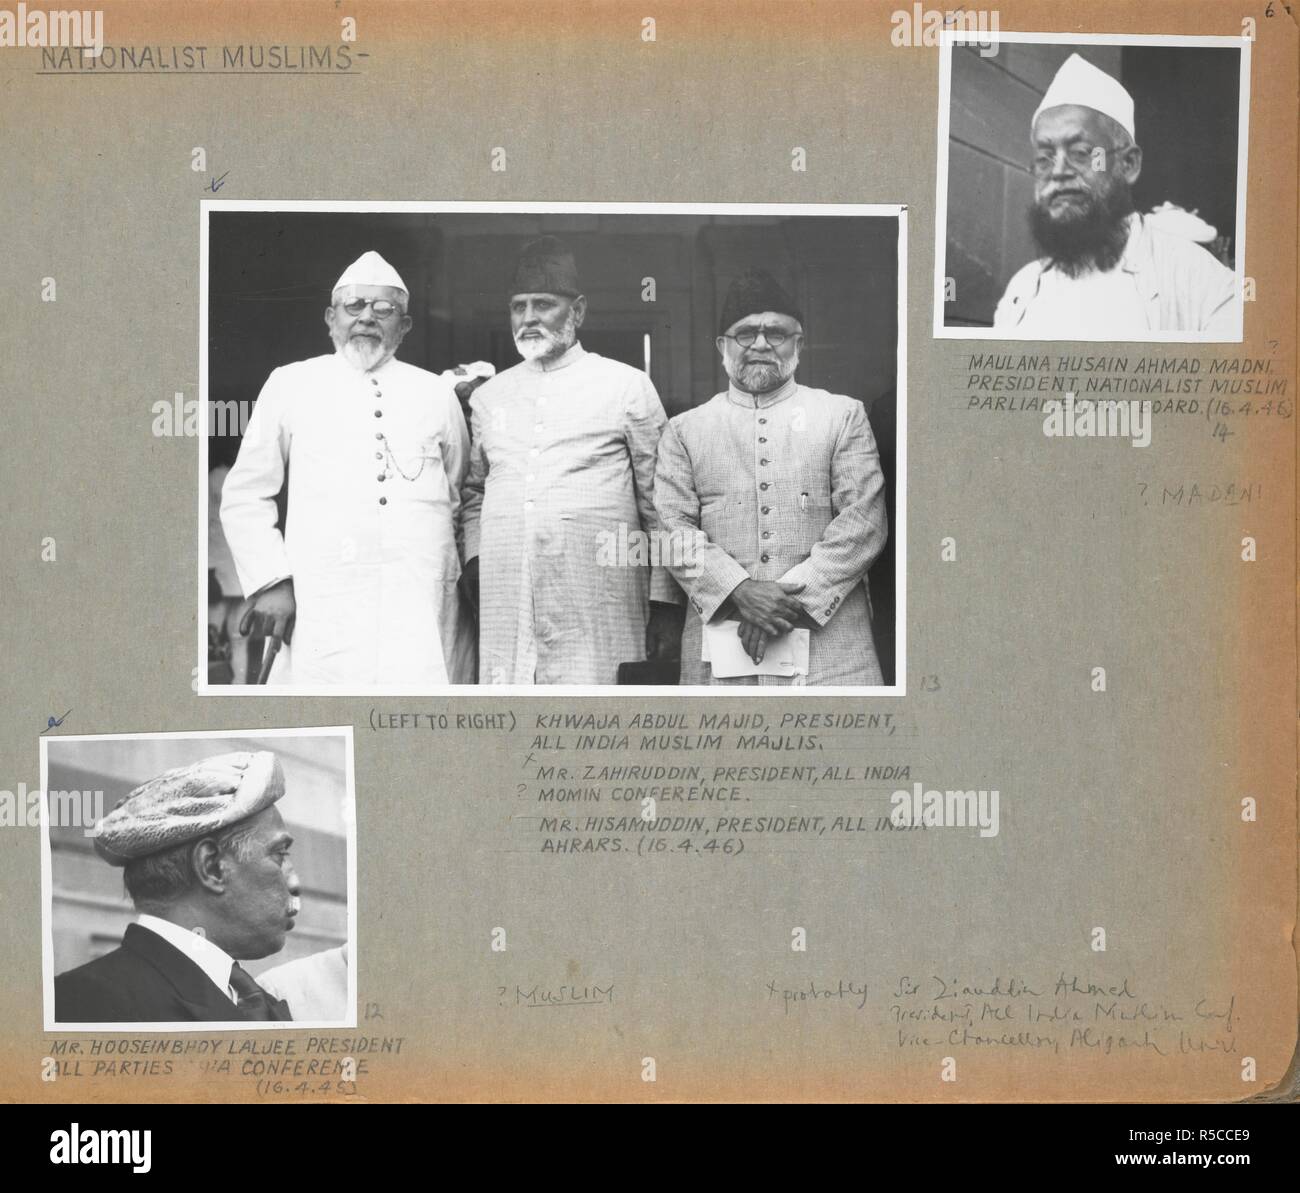 Photo 134/2(12): Nationalist Muslims. Mr Hooseinbhoy Laljee, President, All Parties Shia Conference. Photo 134/2(13): Nationalist Muslims. (Left to right) Khwaja Abdul Majid, President, All India Muslim Majlis; [Sir Ziauddin Ahmed, President, All India Muslim Conference]; Mr Hisamuddin, President, All India Ahrars. Photo 134/2/(14): Nationalist Muslims. Maulana Husain Ahmad Mad[a]ni, President, Nationalist Muslim Parliamentary Board.    . [Joyce Collection: Cabinet Mission to India, 1946 - volume II.]. India 16 Apr 1946. Source: Photo 134/2/12-14. Stock Photo